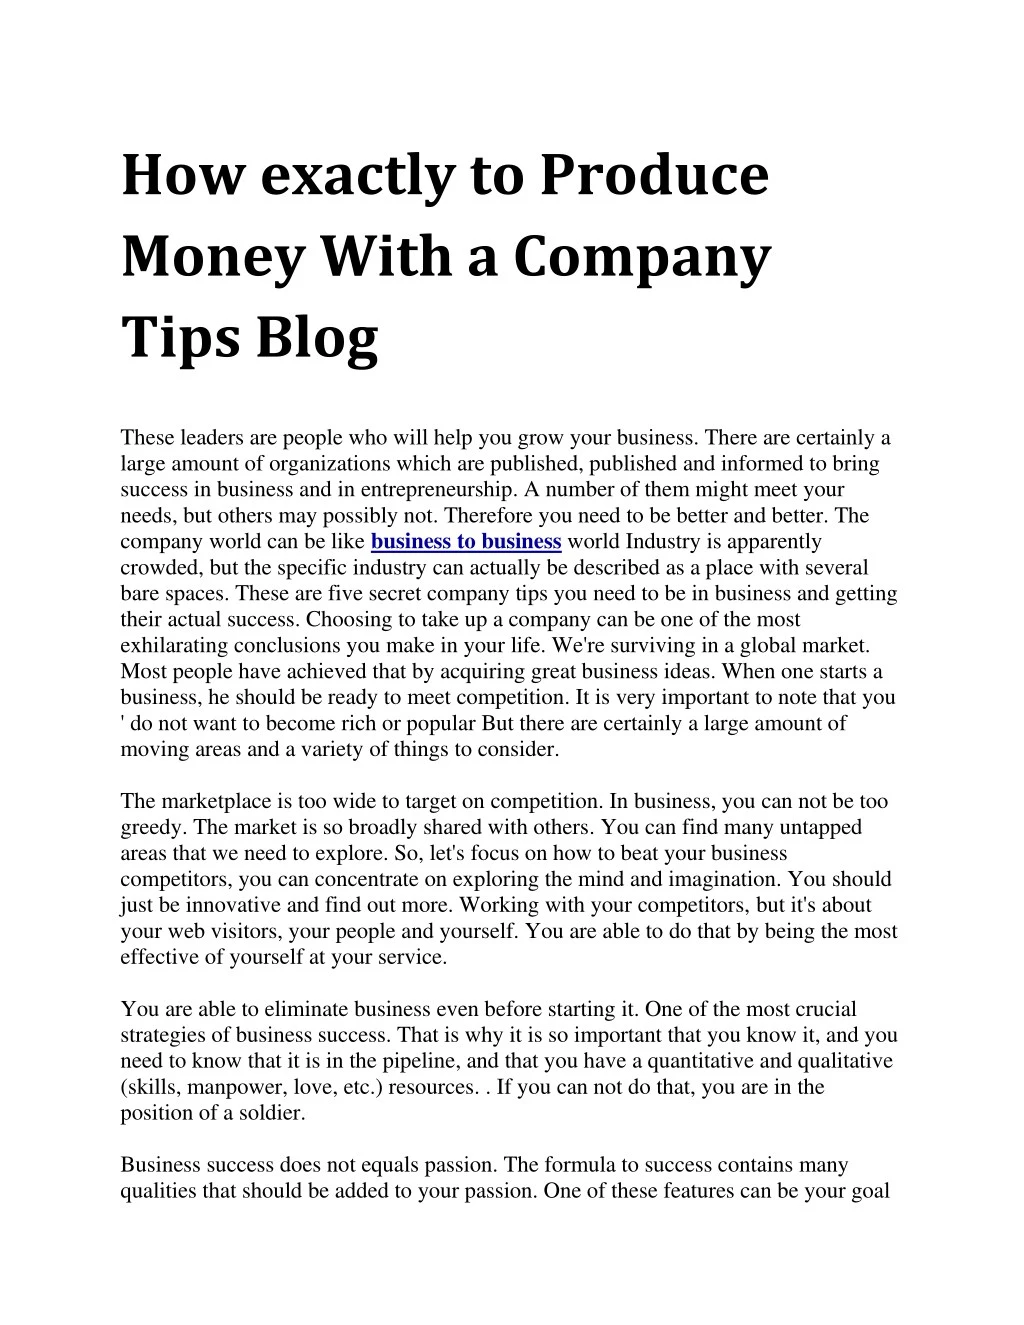 how exactly to produce money with a company tips